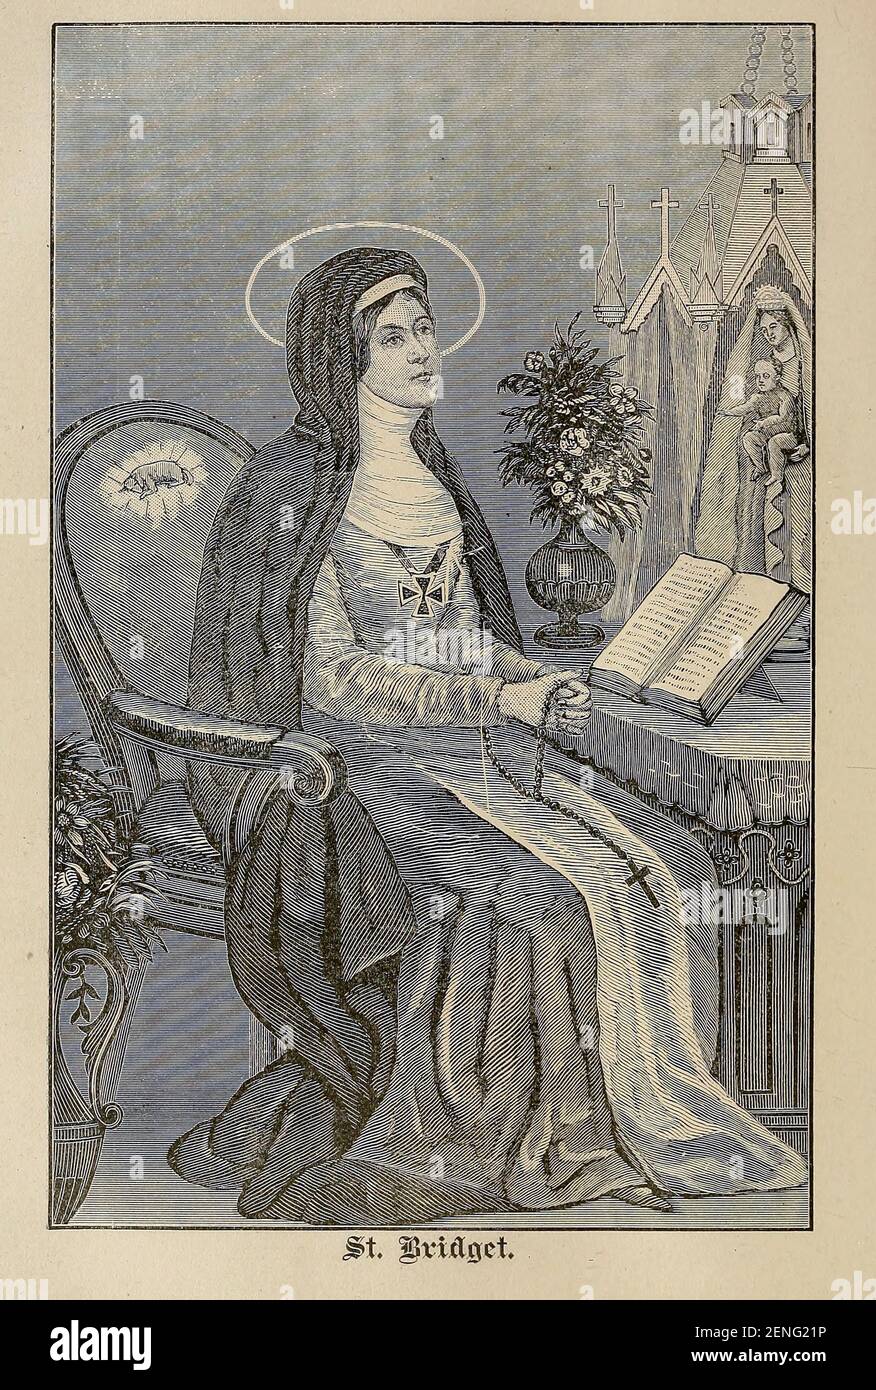 St. Bridget From ' The pictorial Catholic library ' containing seven volumes in one: History of the Blessed Virgin -- The dove of the tabernacle -- Catholic history -- Apparition of the Blessed Virgin -- A chronological index -- Pastoral letters of the Third Plenary. Council -- A chaplet of verses -- Catholic hymns  Published in New York by Murphy & McCarthy in 1887 Stock Photo